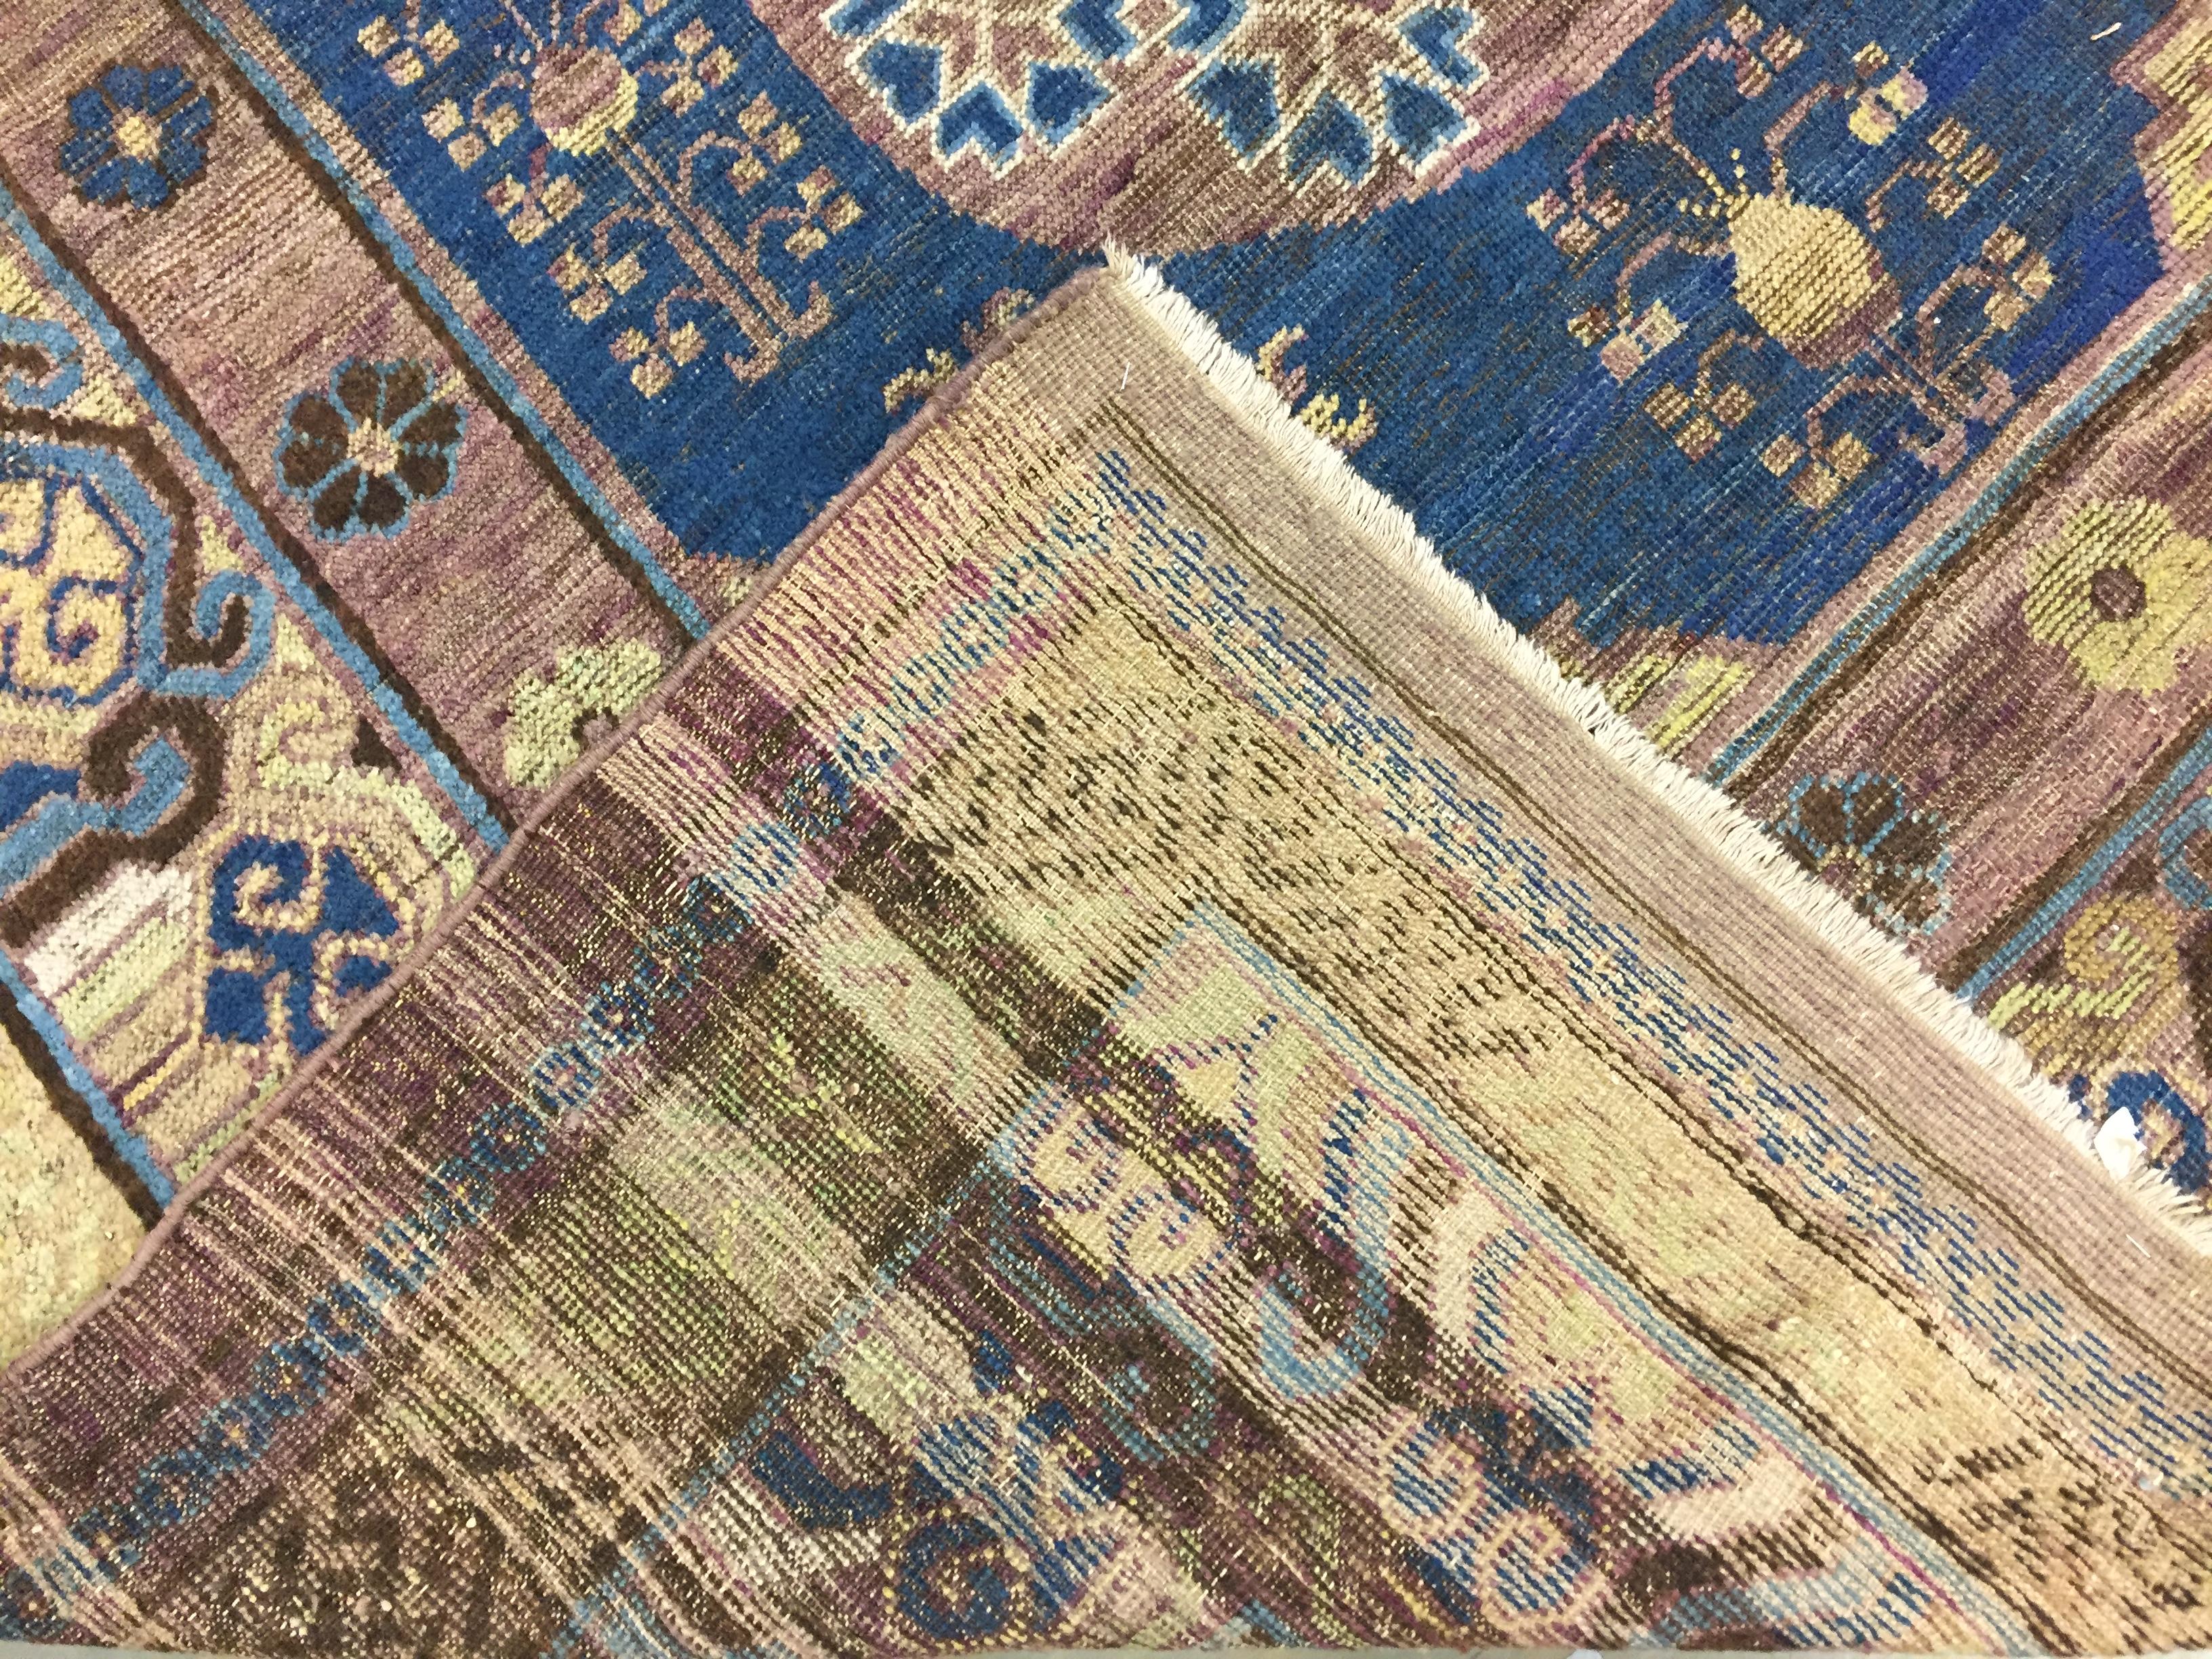 Antique Khotan Rug 5'11 x 11'5 In Good Condition For Sale In New York, NY